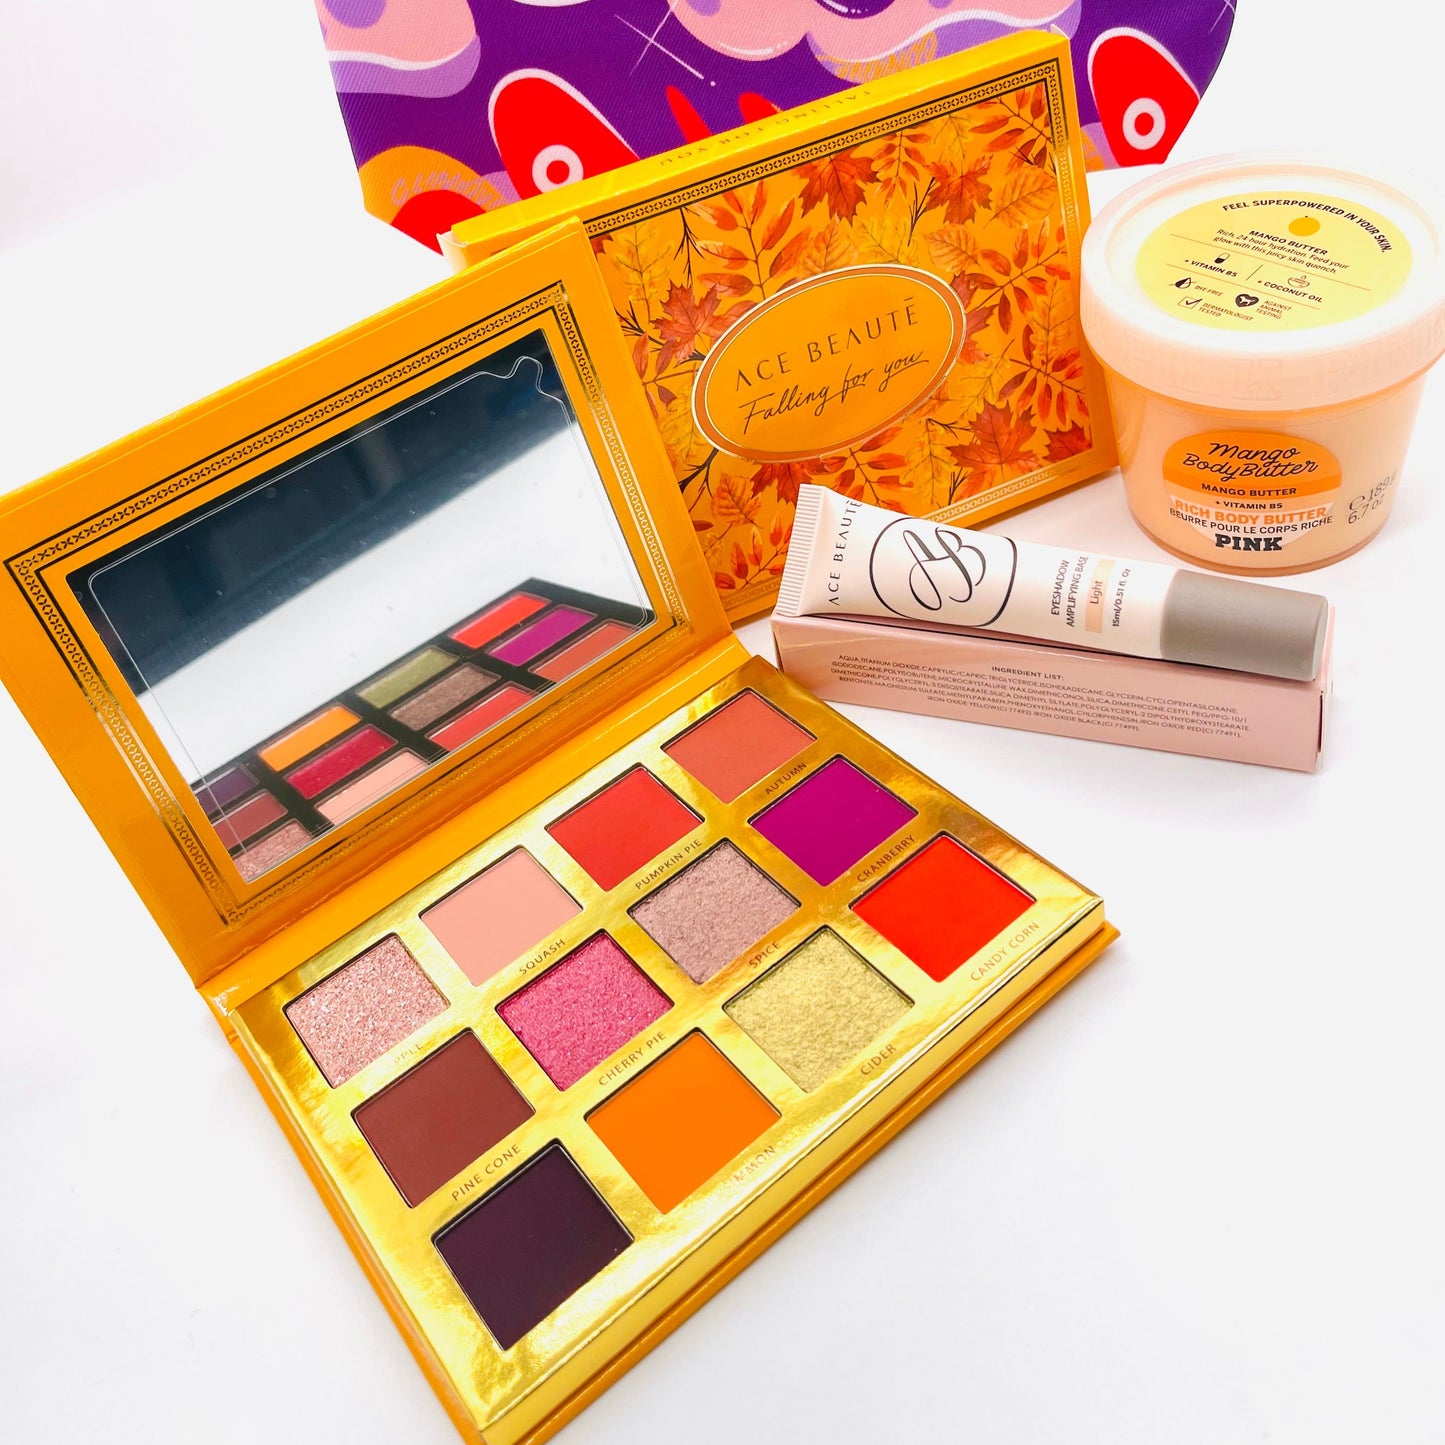 ACE IN THE HOLE BEAUTY BUNDLE